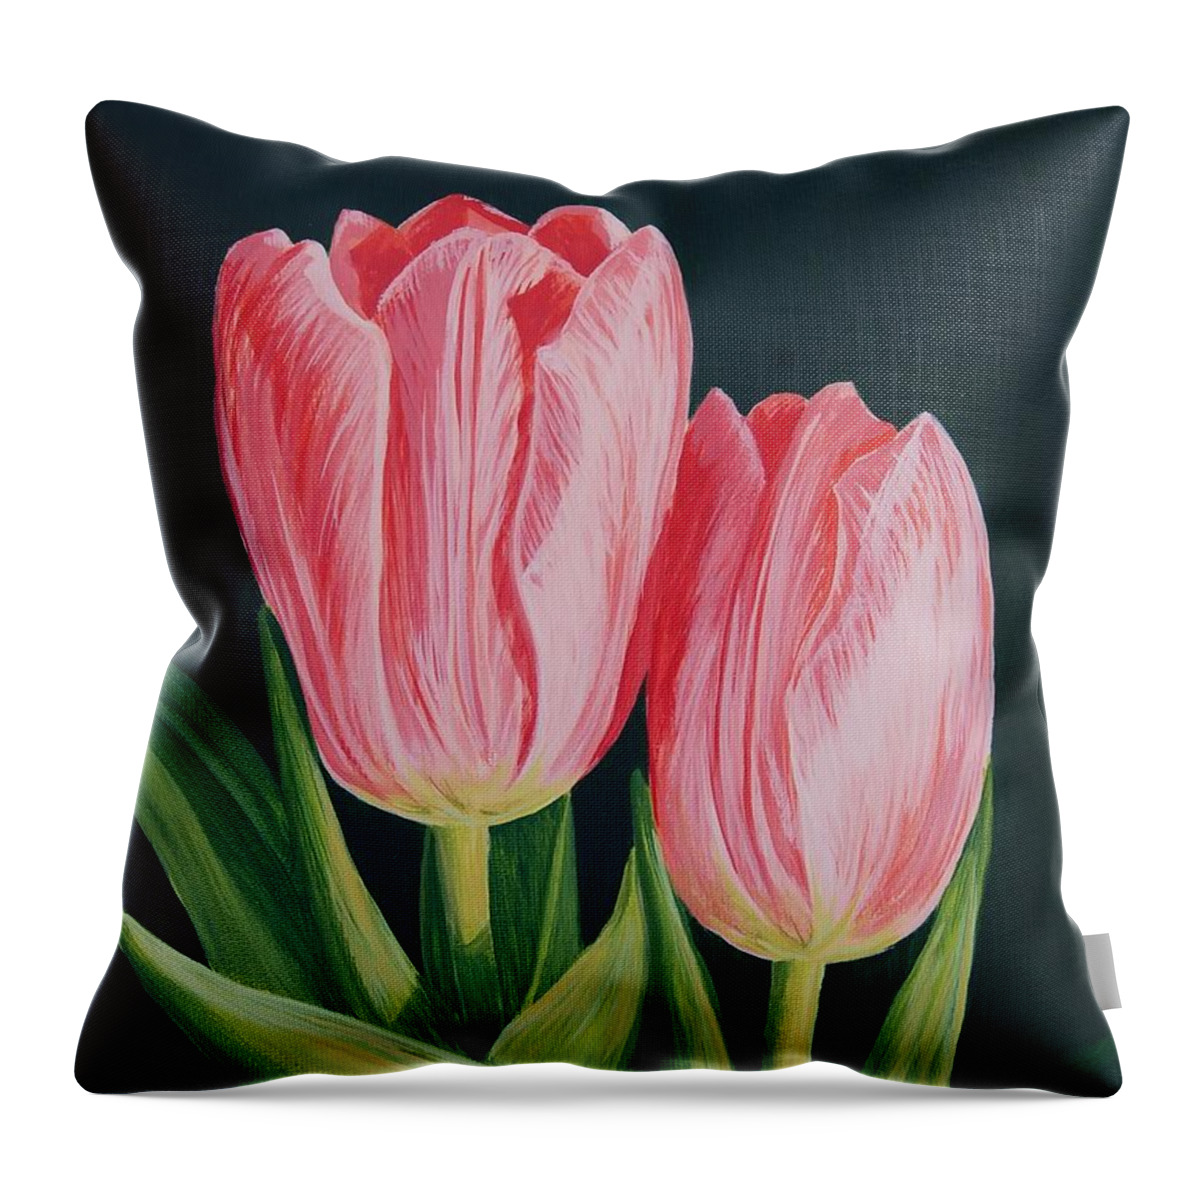 Flower Throw Pillow featuring the painting Tulips by Cheryl Fecht